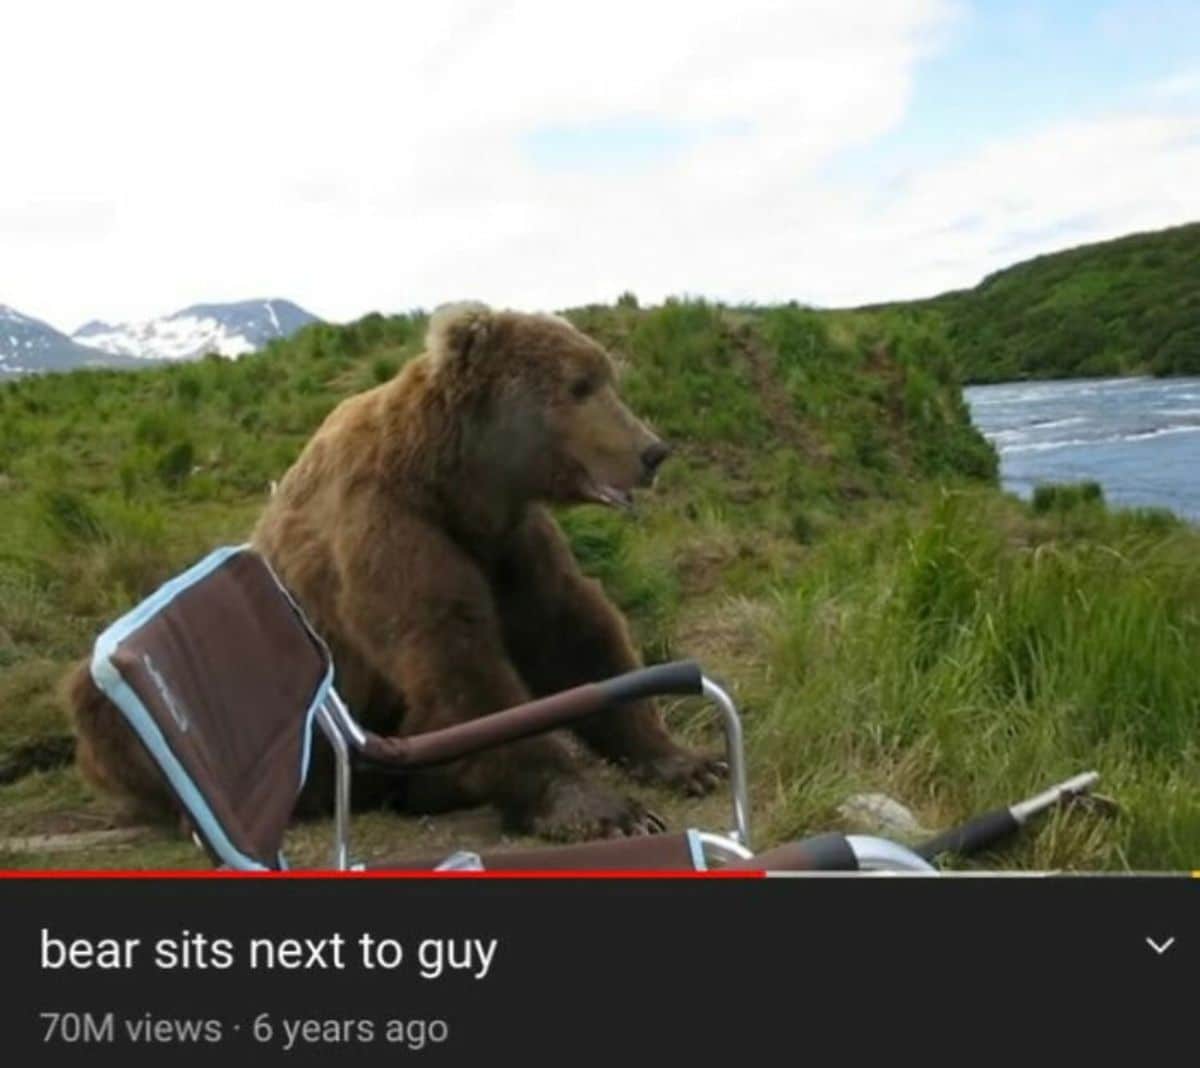 grizzly bear sitting on the ground next to a brown collapsible chair in front of a river